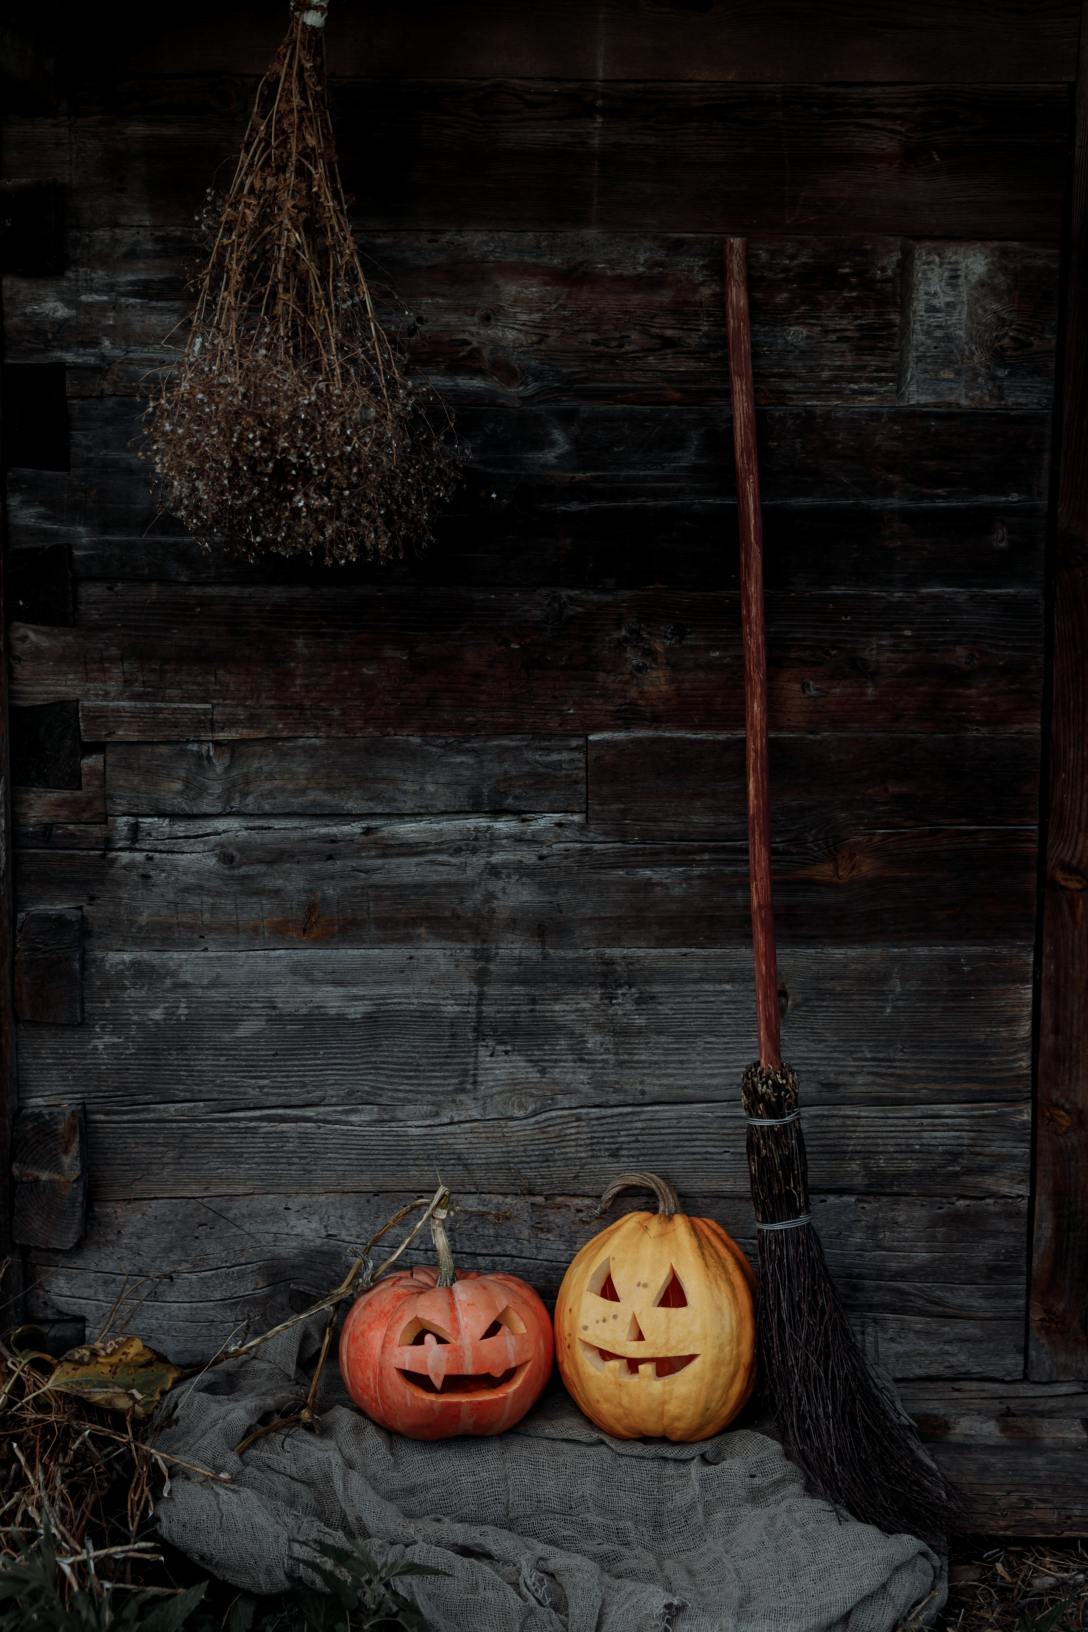 Subtly Creepy Books for Halloween Featured Image